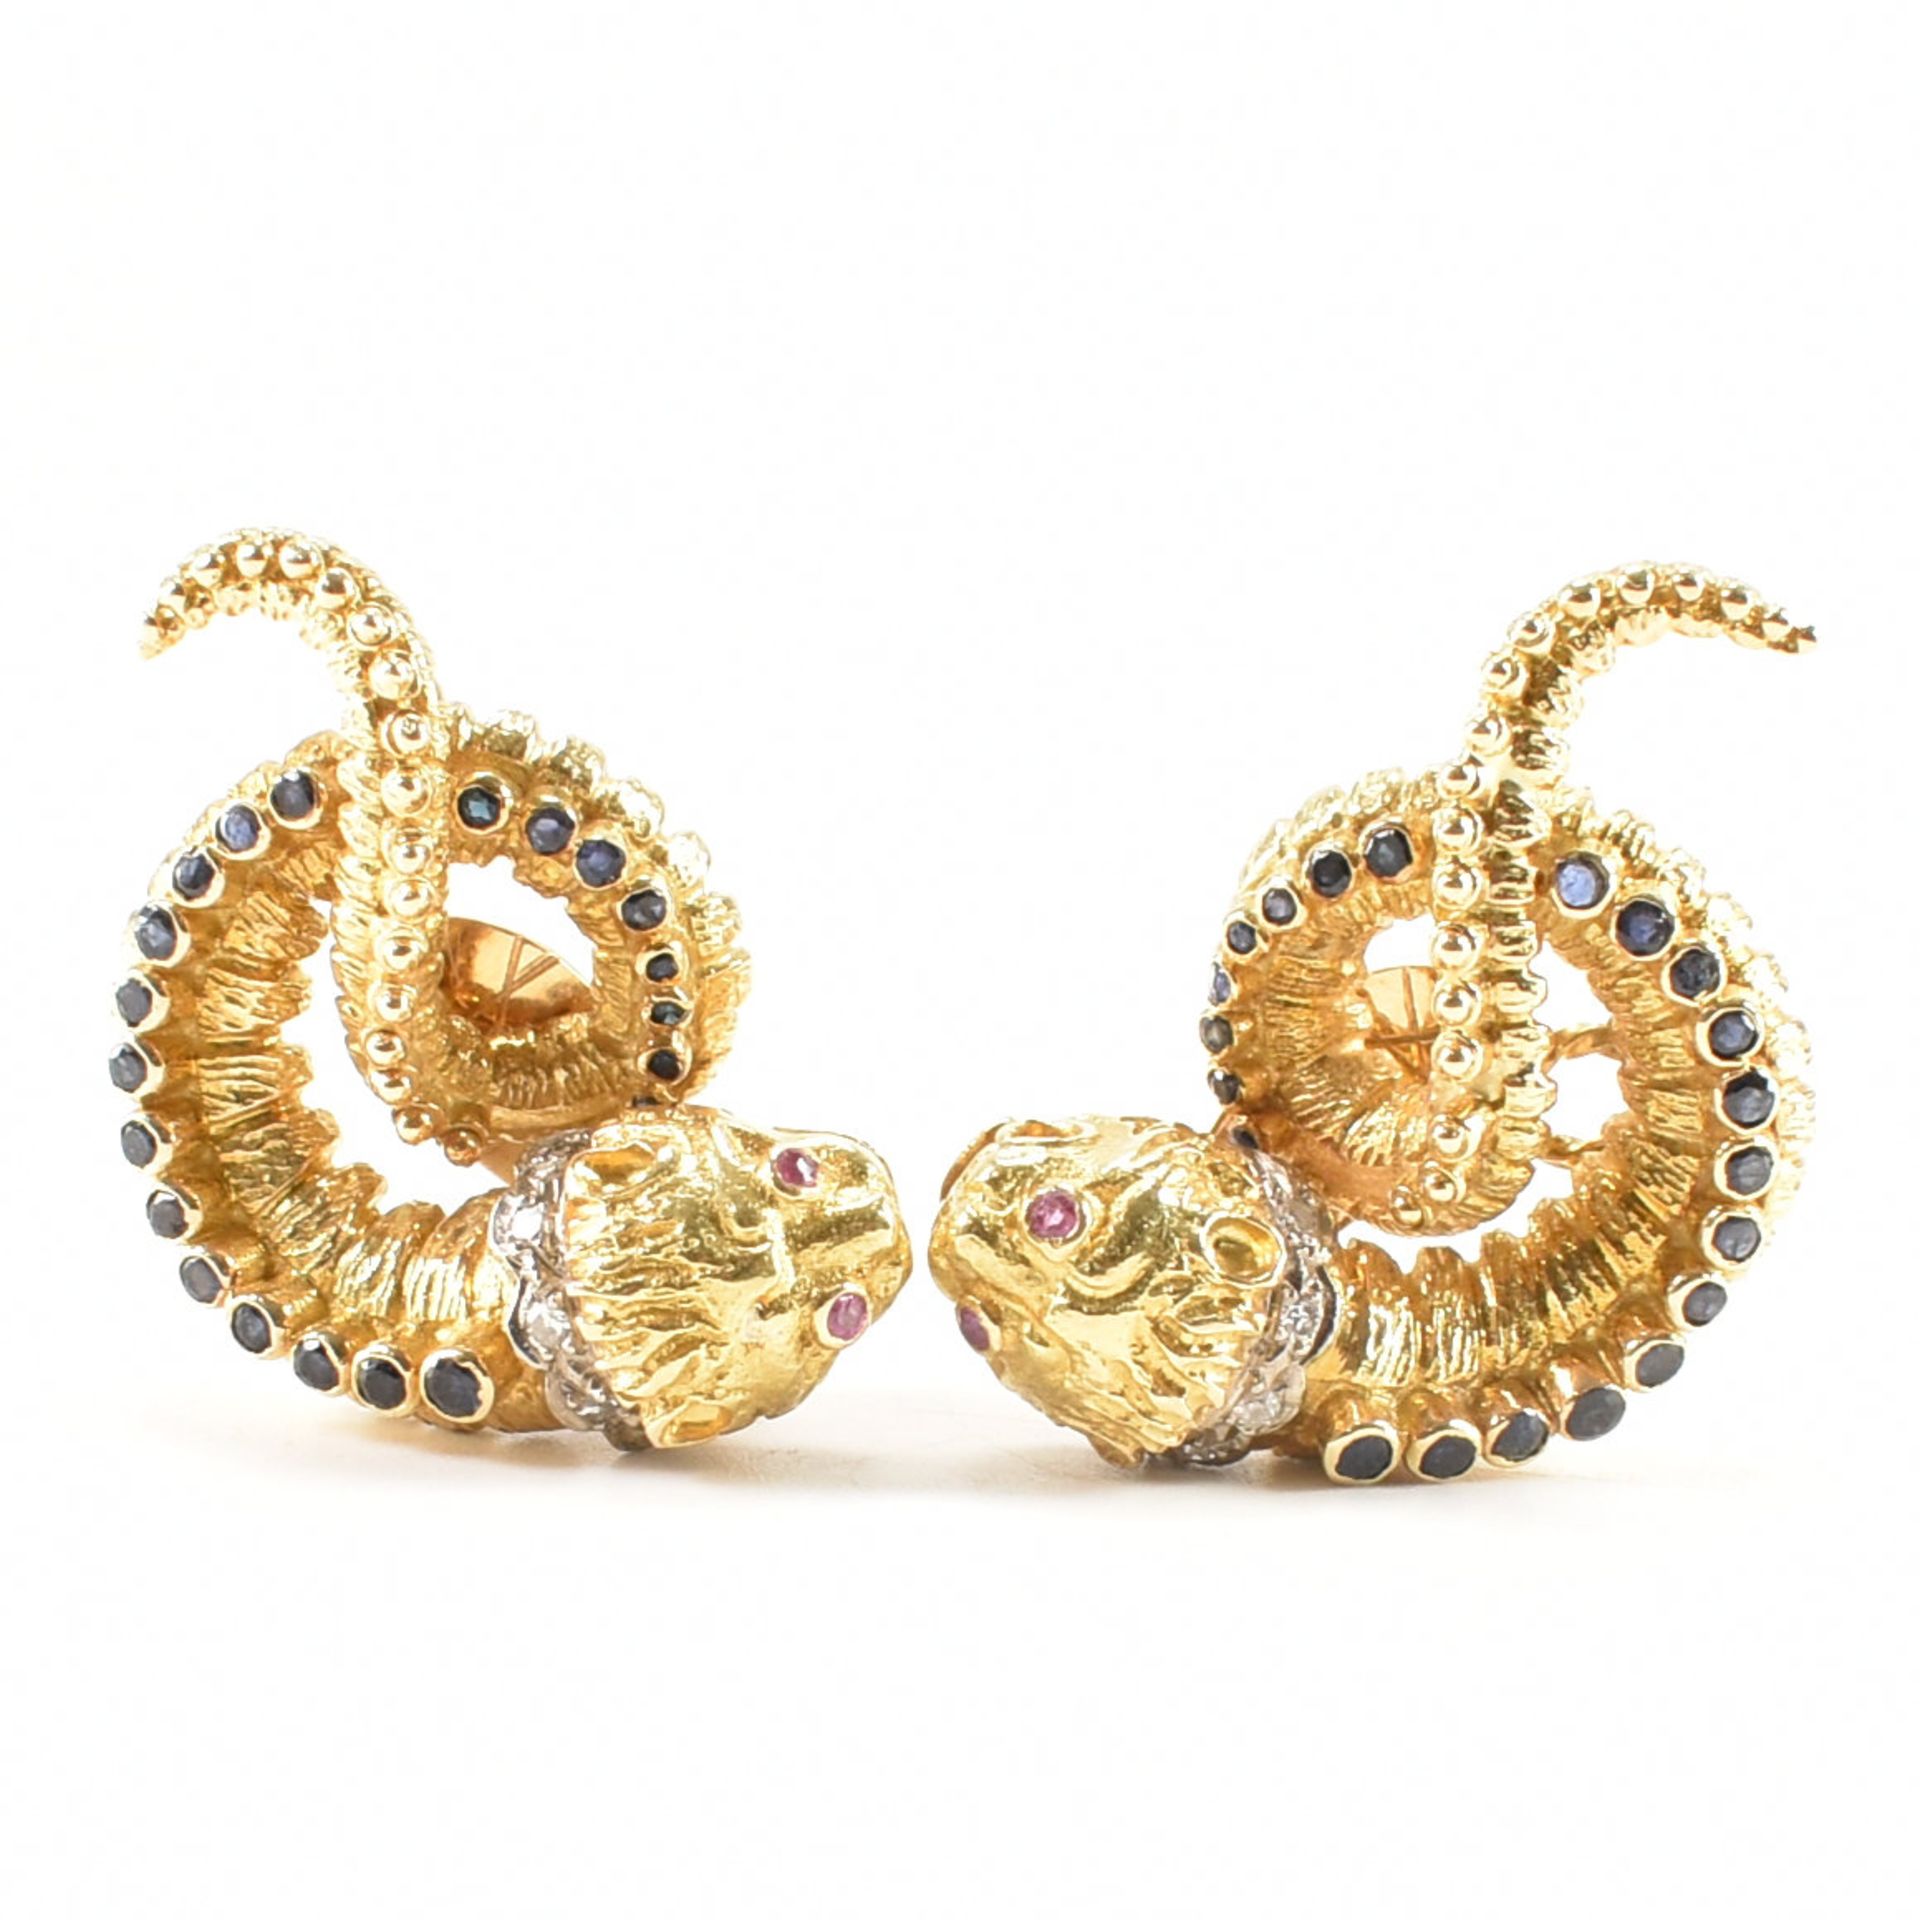 PAIR OF LALAOUNIS 18CT GOLD STONE SET CHIMERA EARRINGS - Image 3 of 13